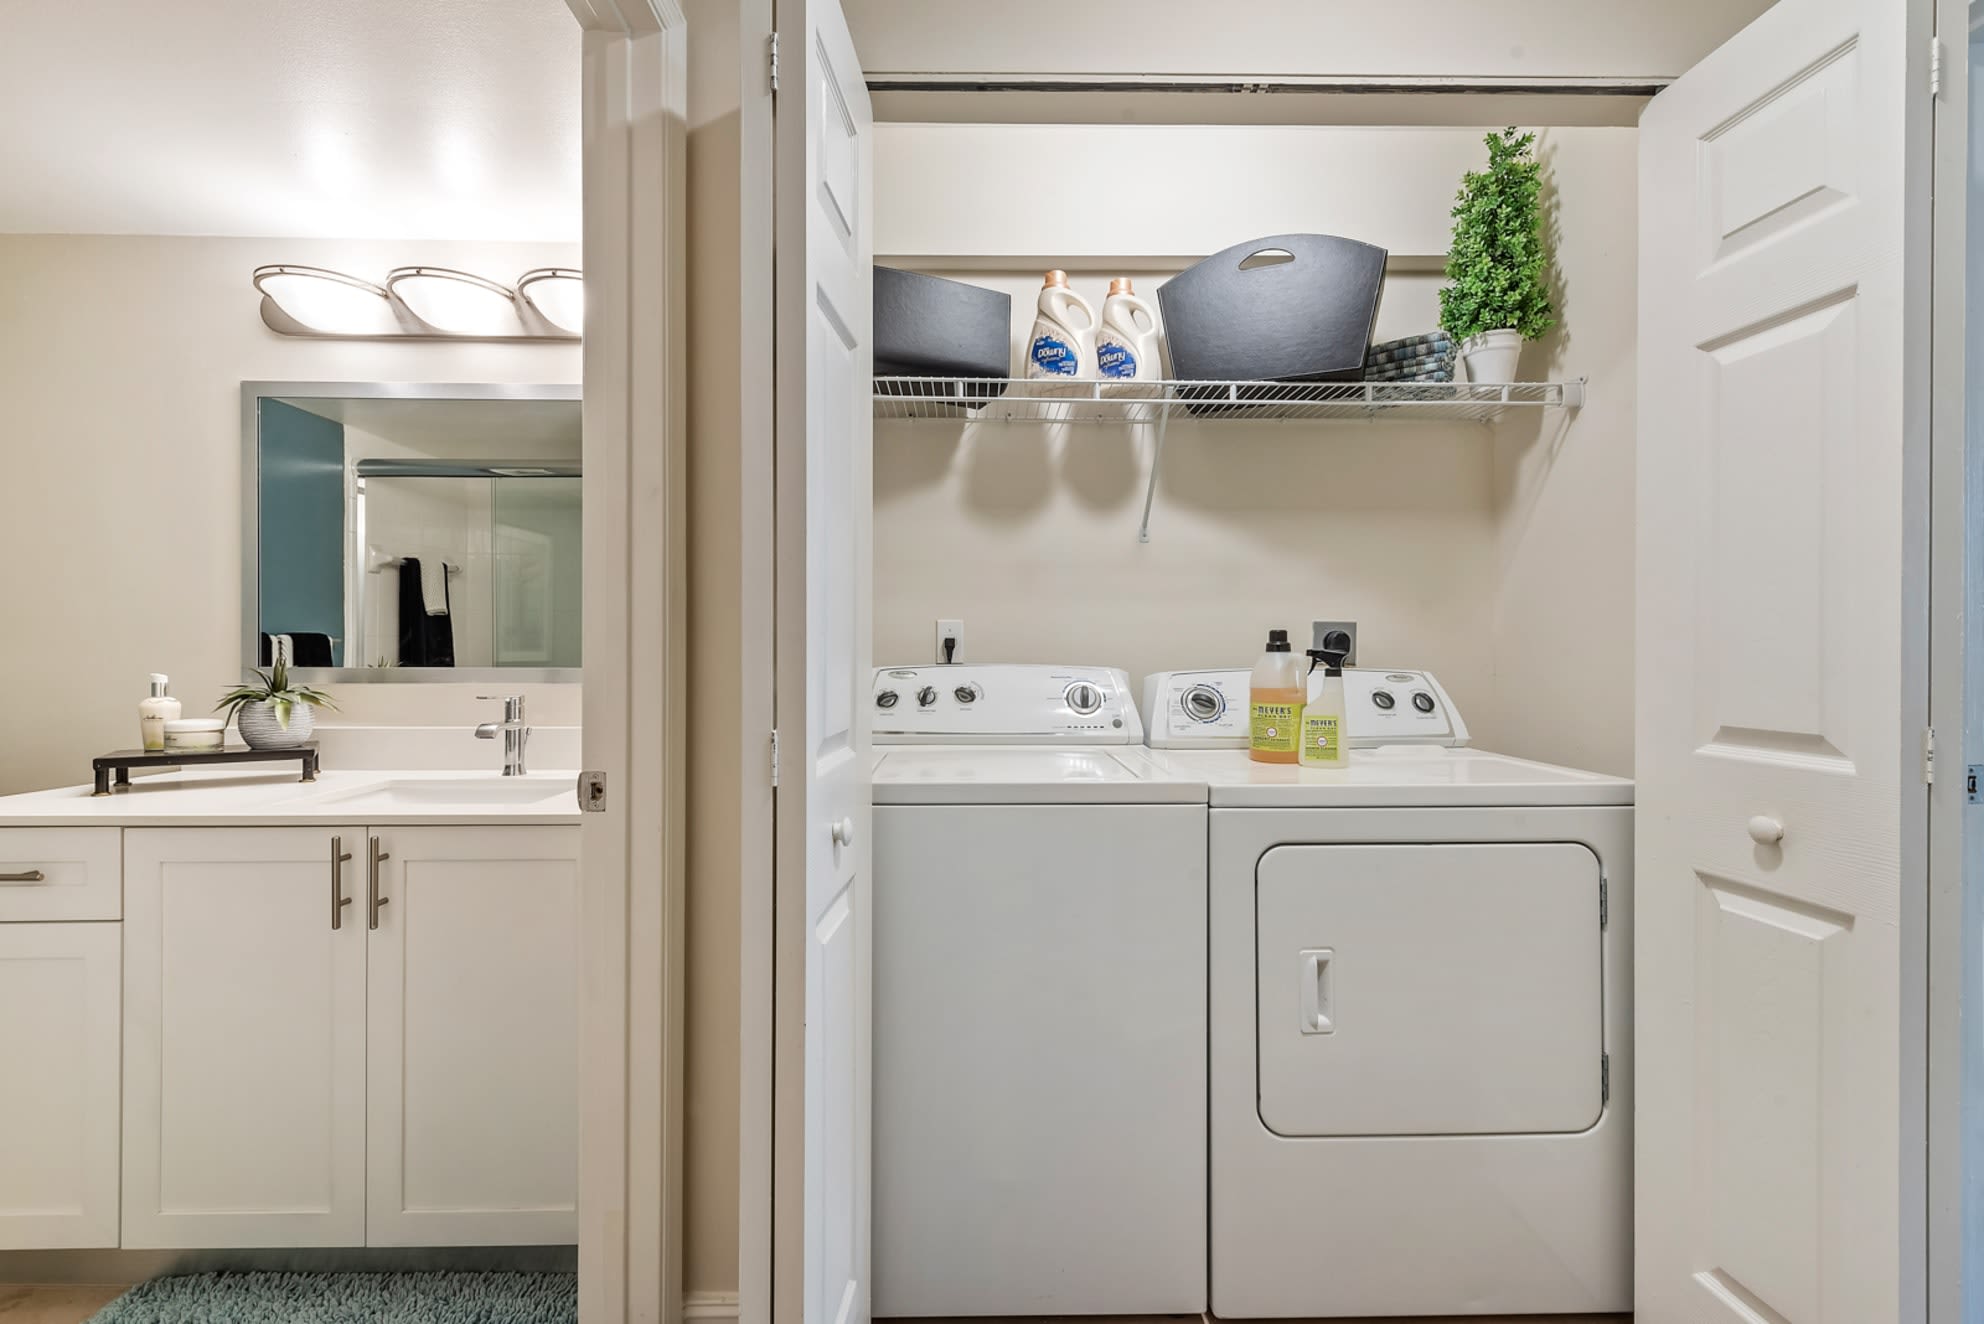 Private washer and dryer with shelving at Crescent House Apartments in Miami Lakes, Florida